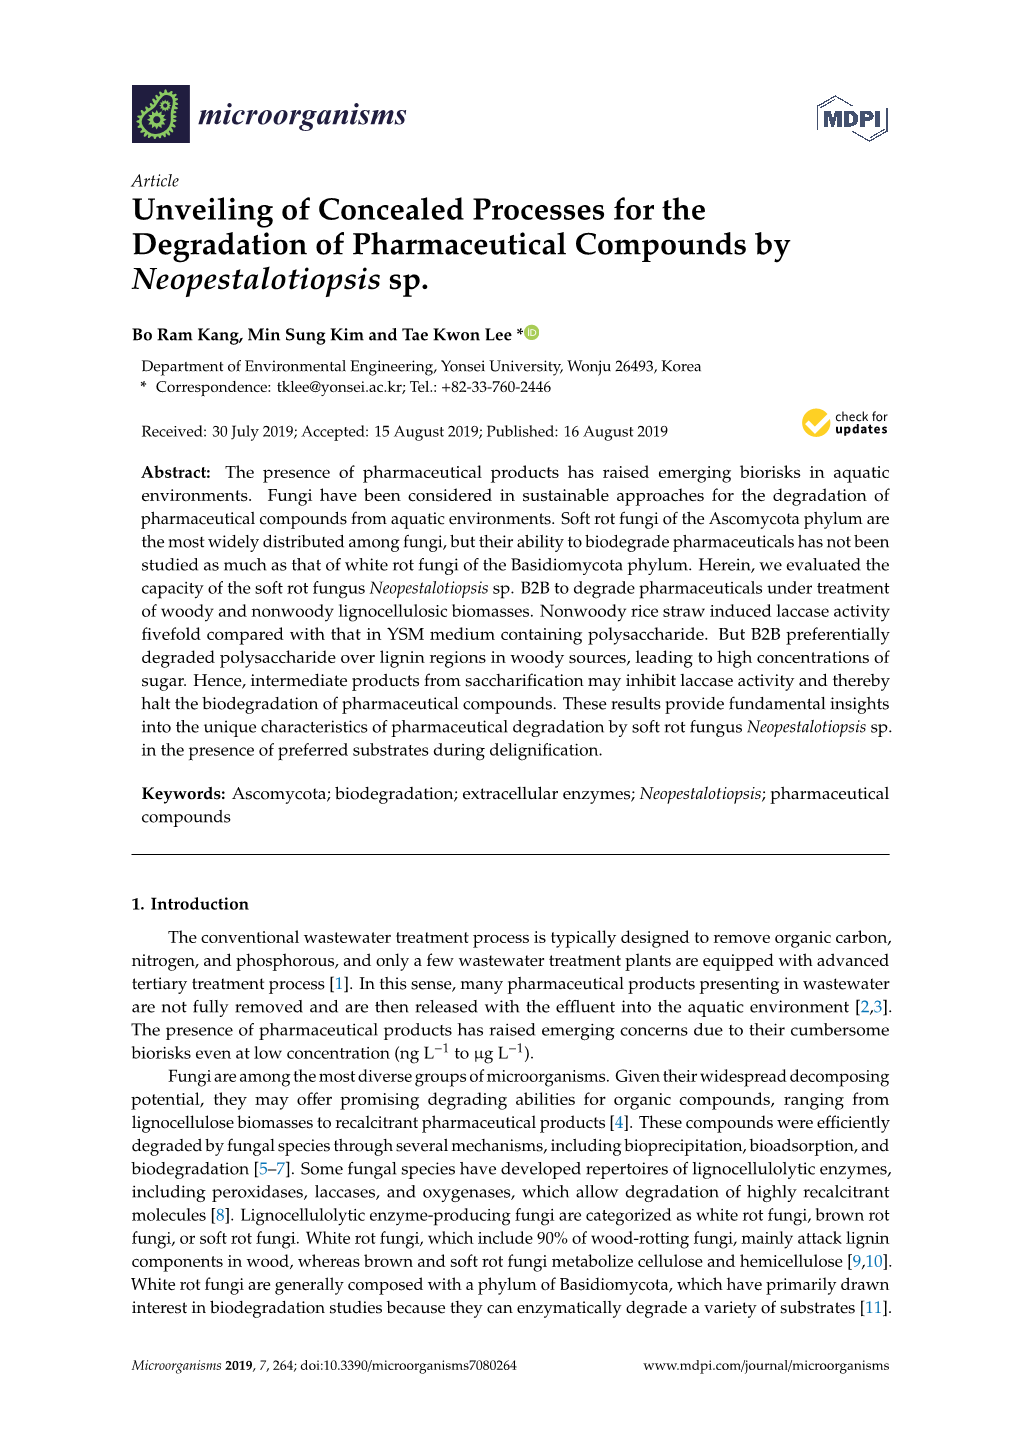 Unveiling of Concealed Processes for the Degradation of Pharmaceutical Compounds by Neopestalotiopsis Sp